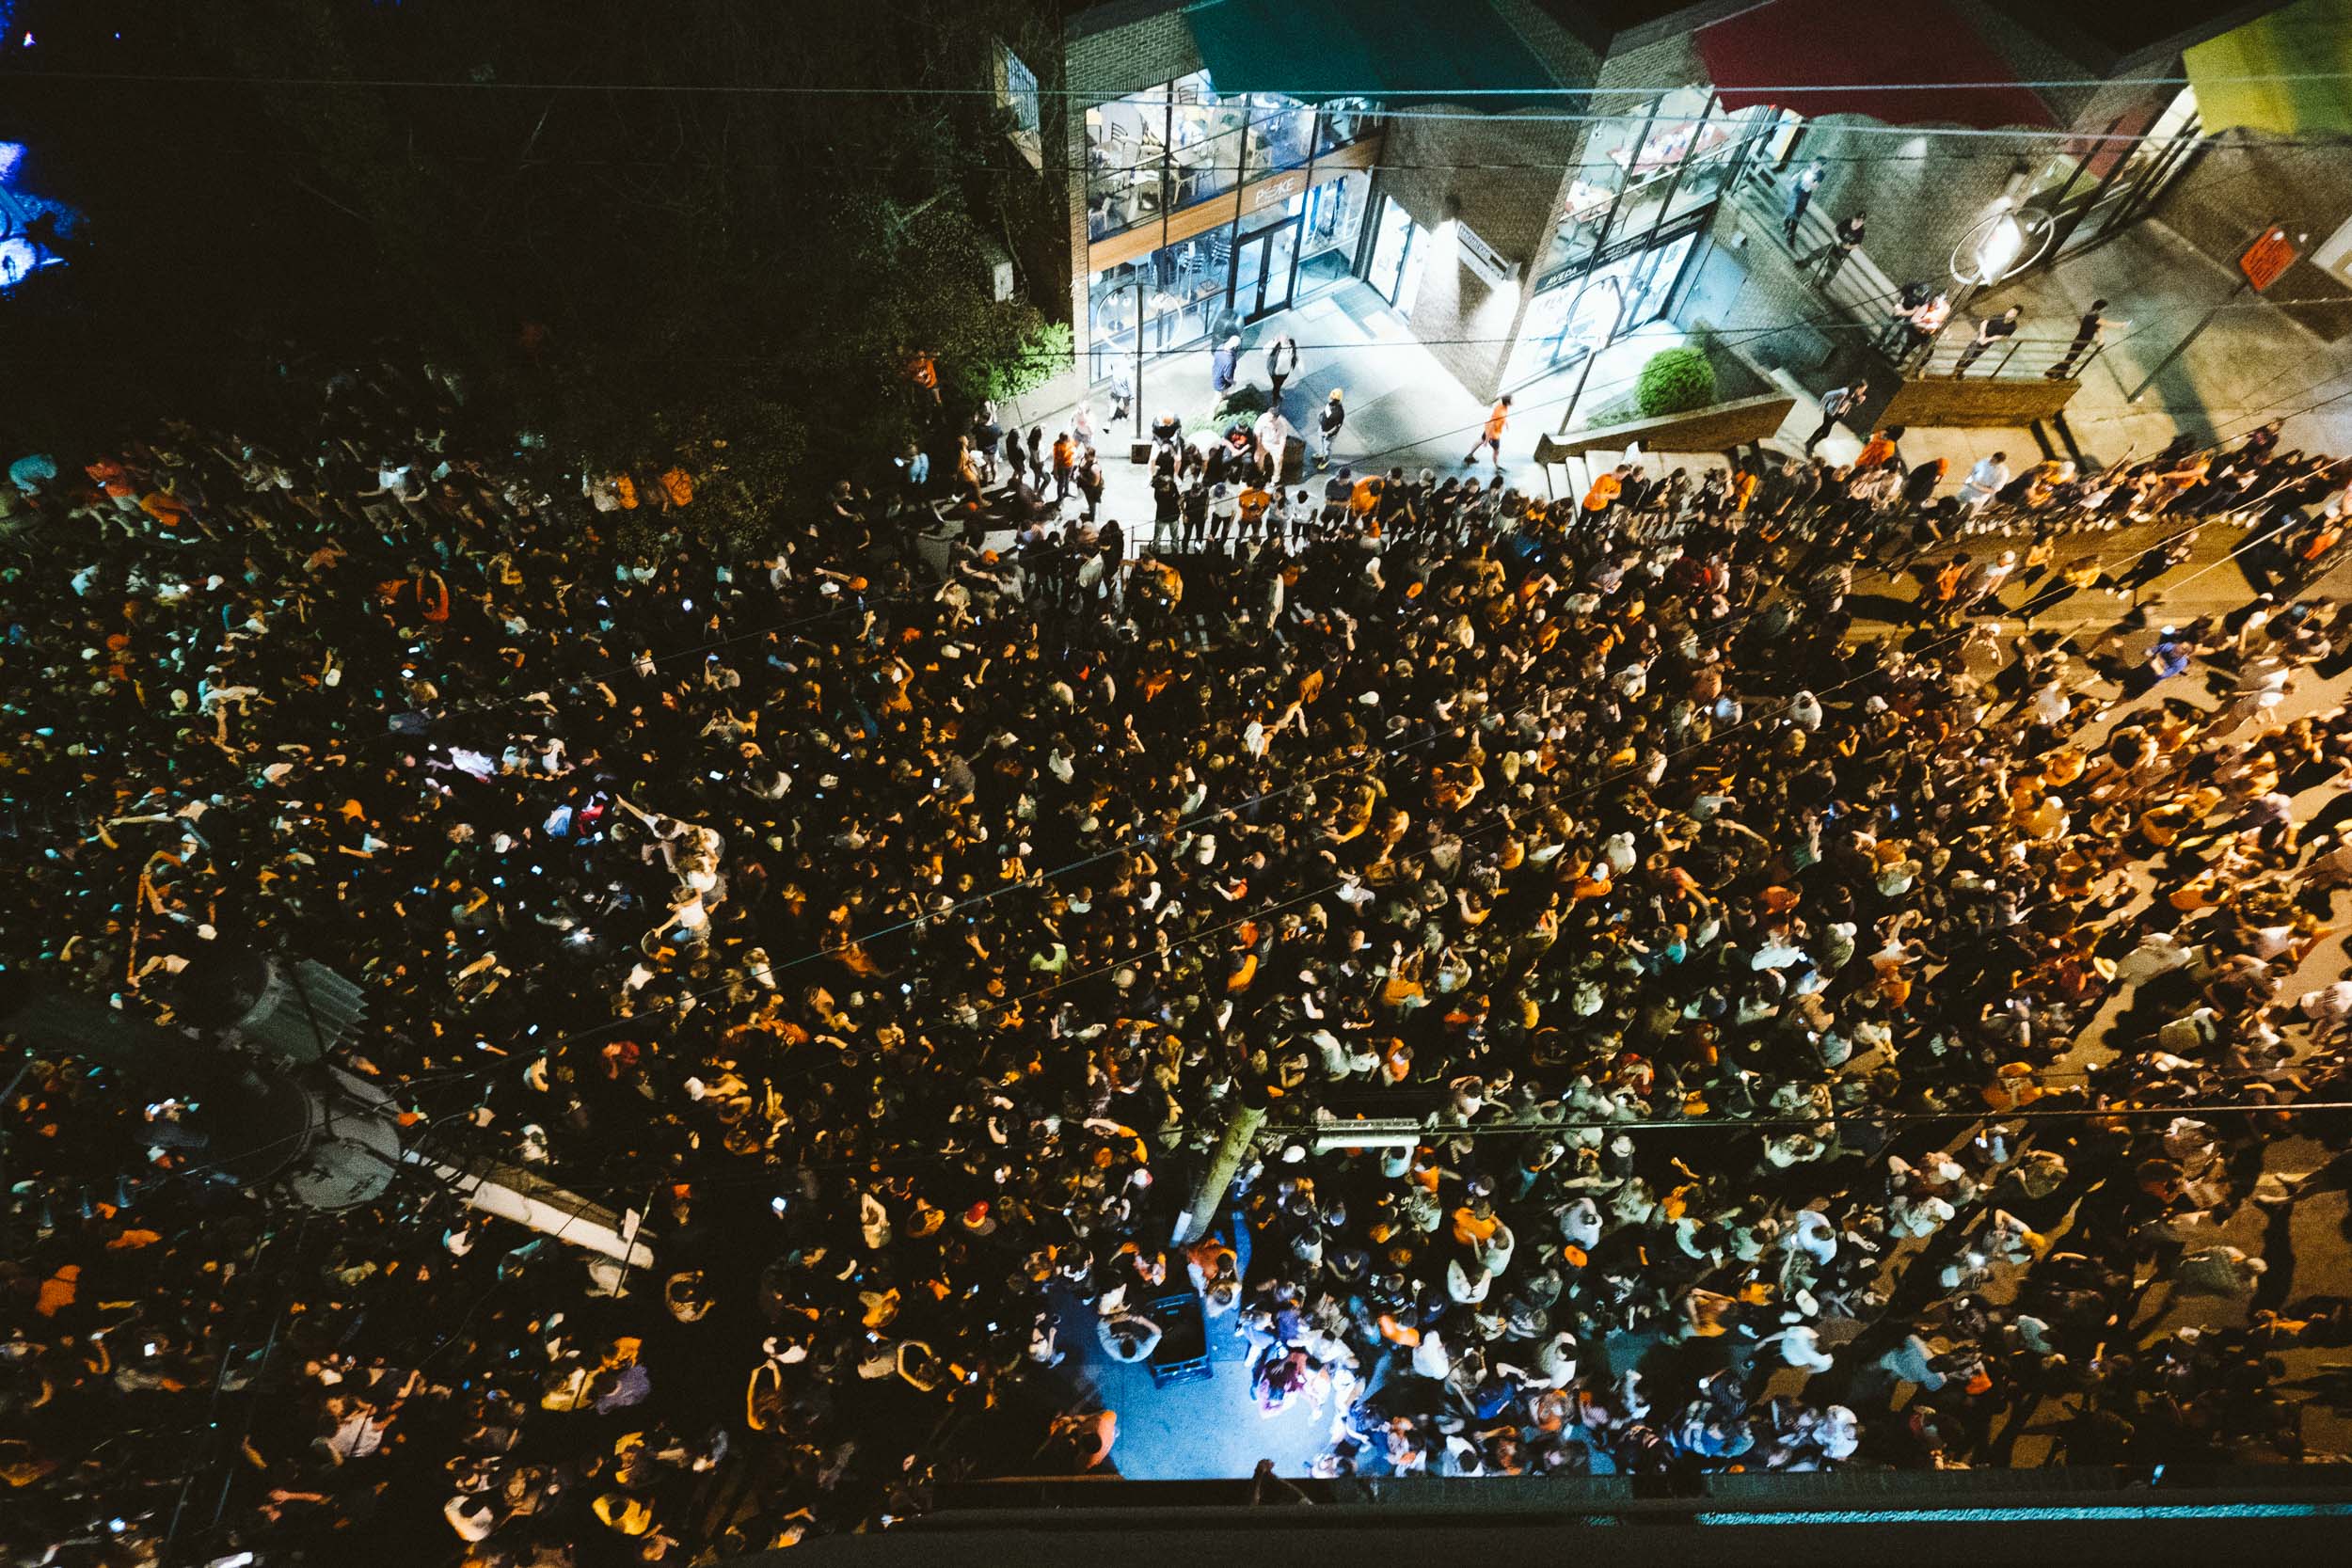 Aerial view of crowd outside of the building celebrating a UVA victory